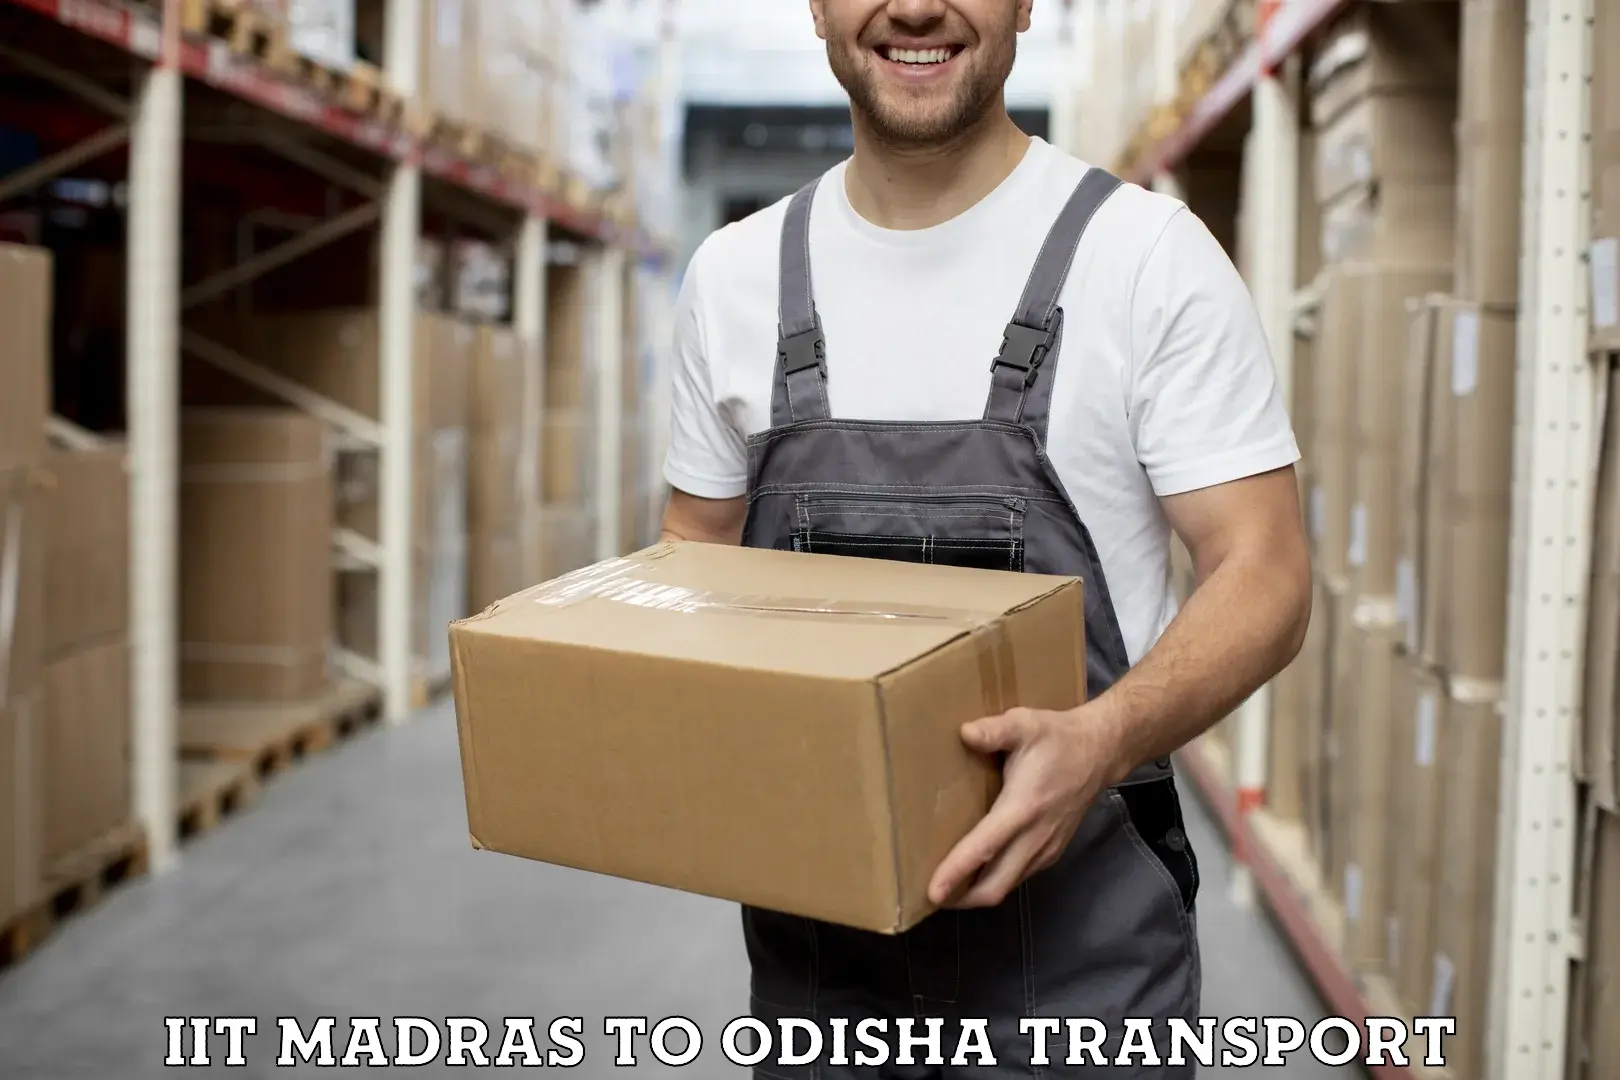 Container transport service IIT Madras to Dhenkanal